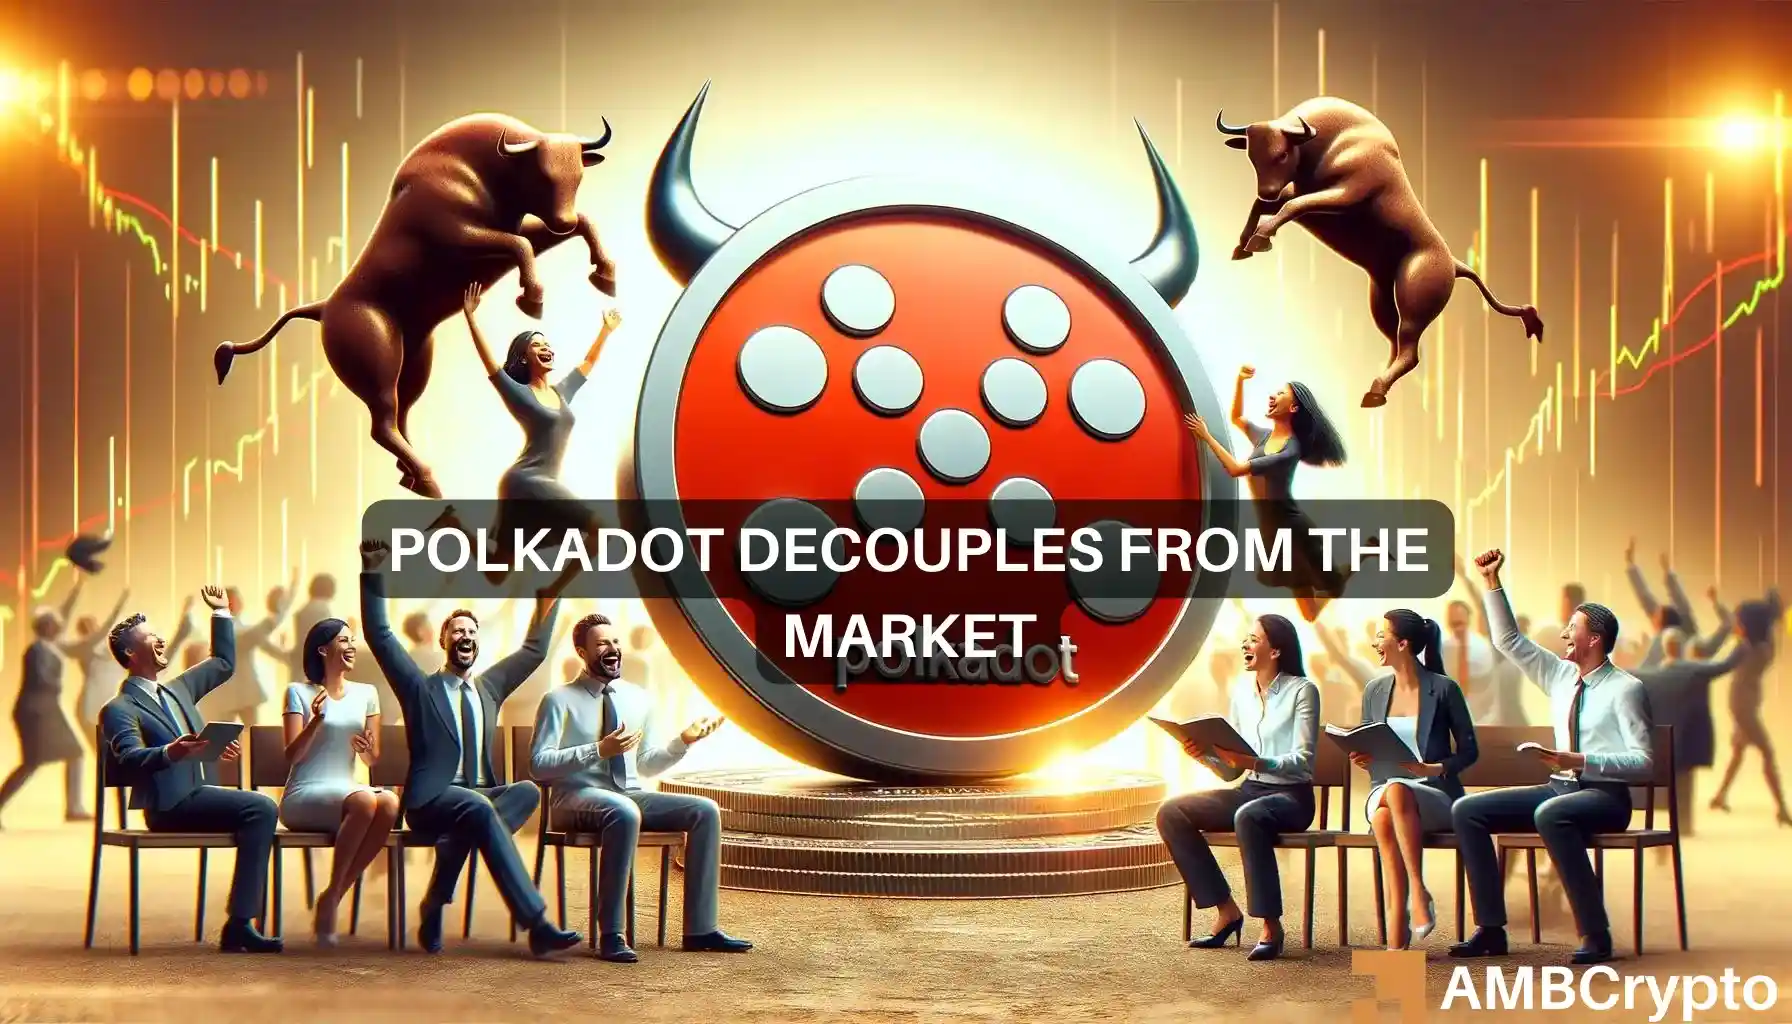 Polkadot surprises traders with latest hike – Can DOT hit $7.5 next?